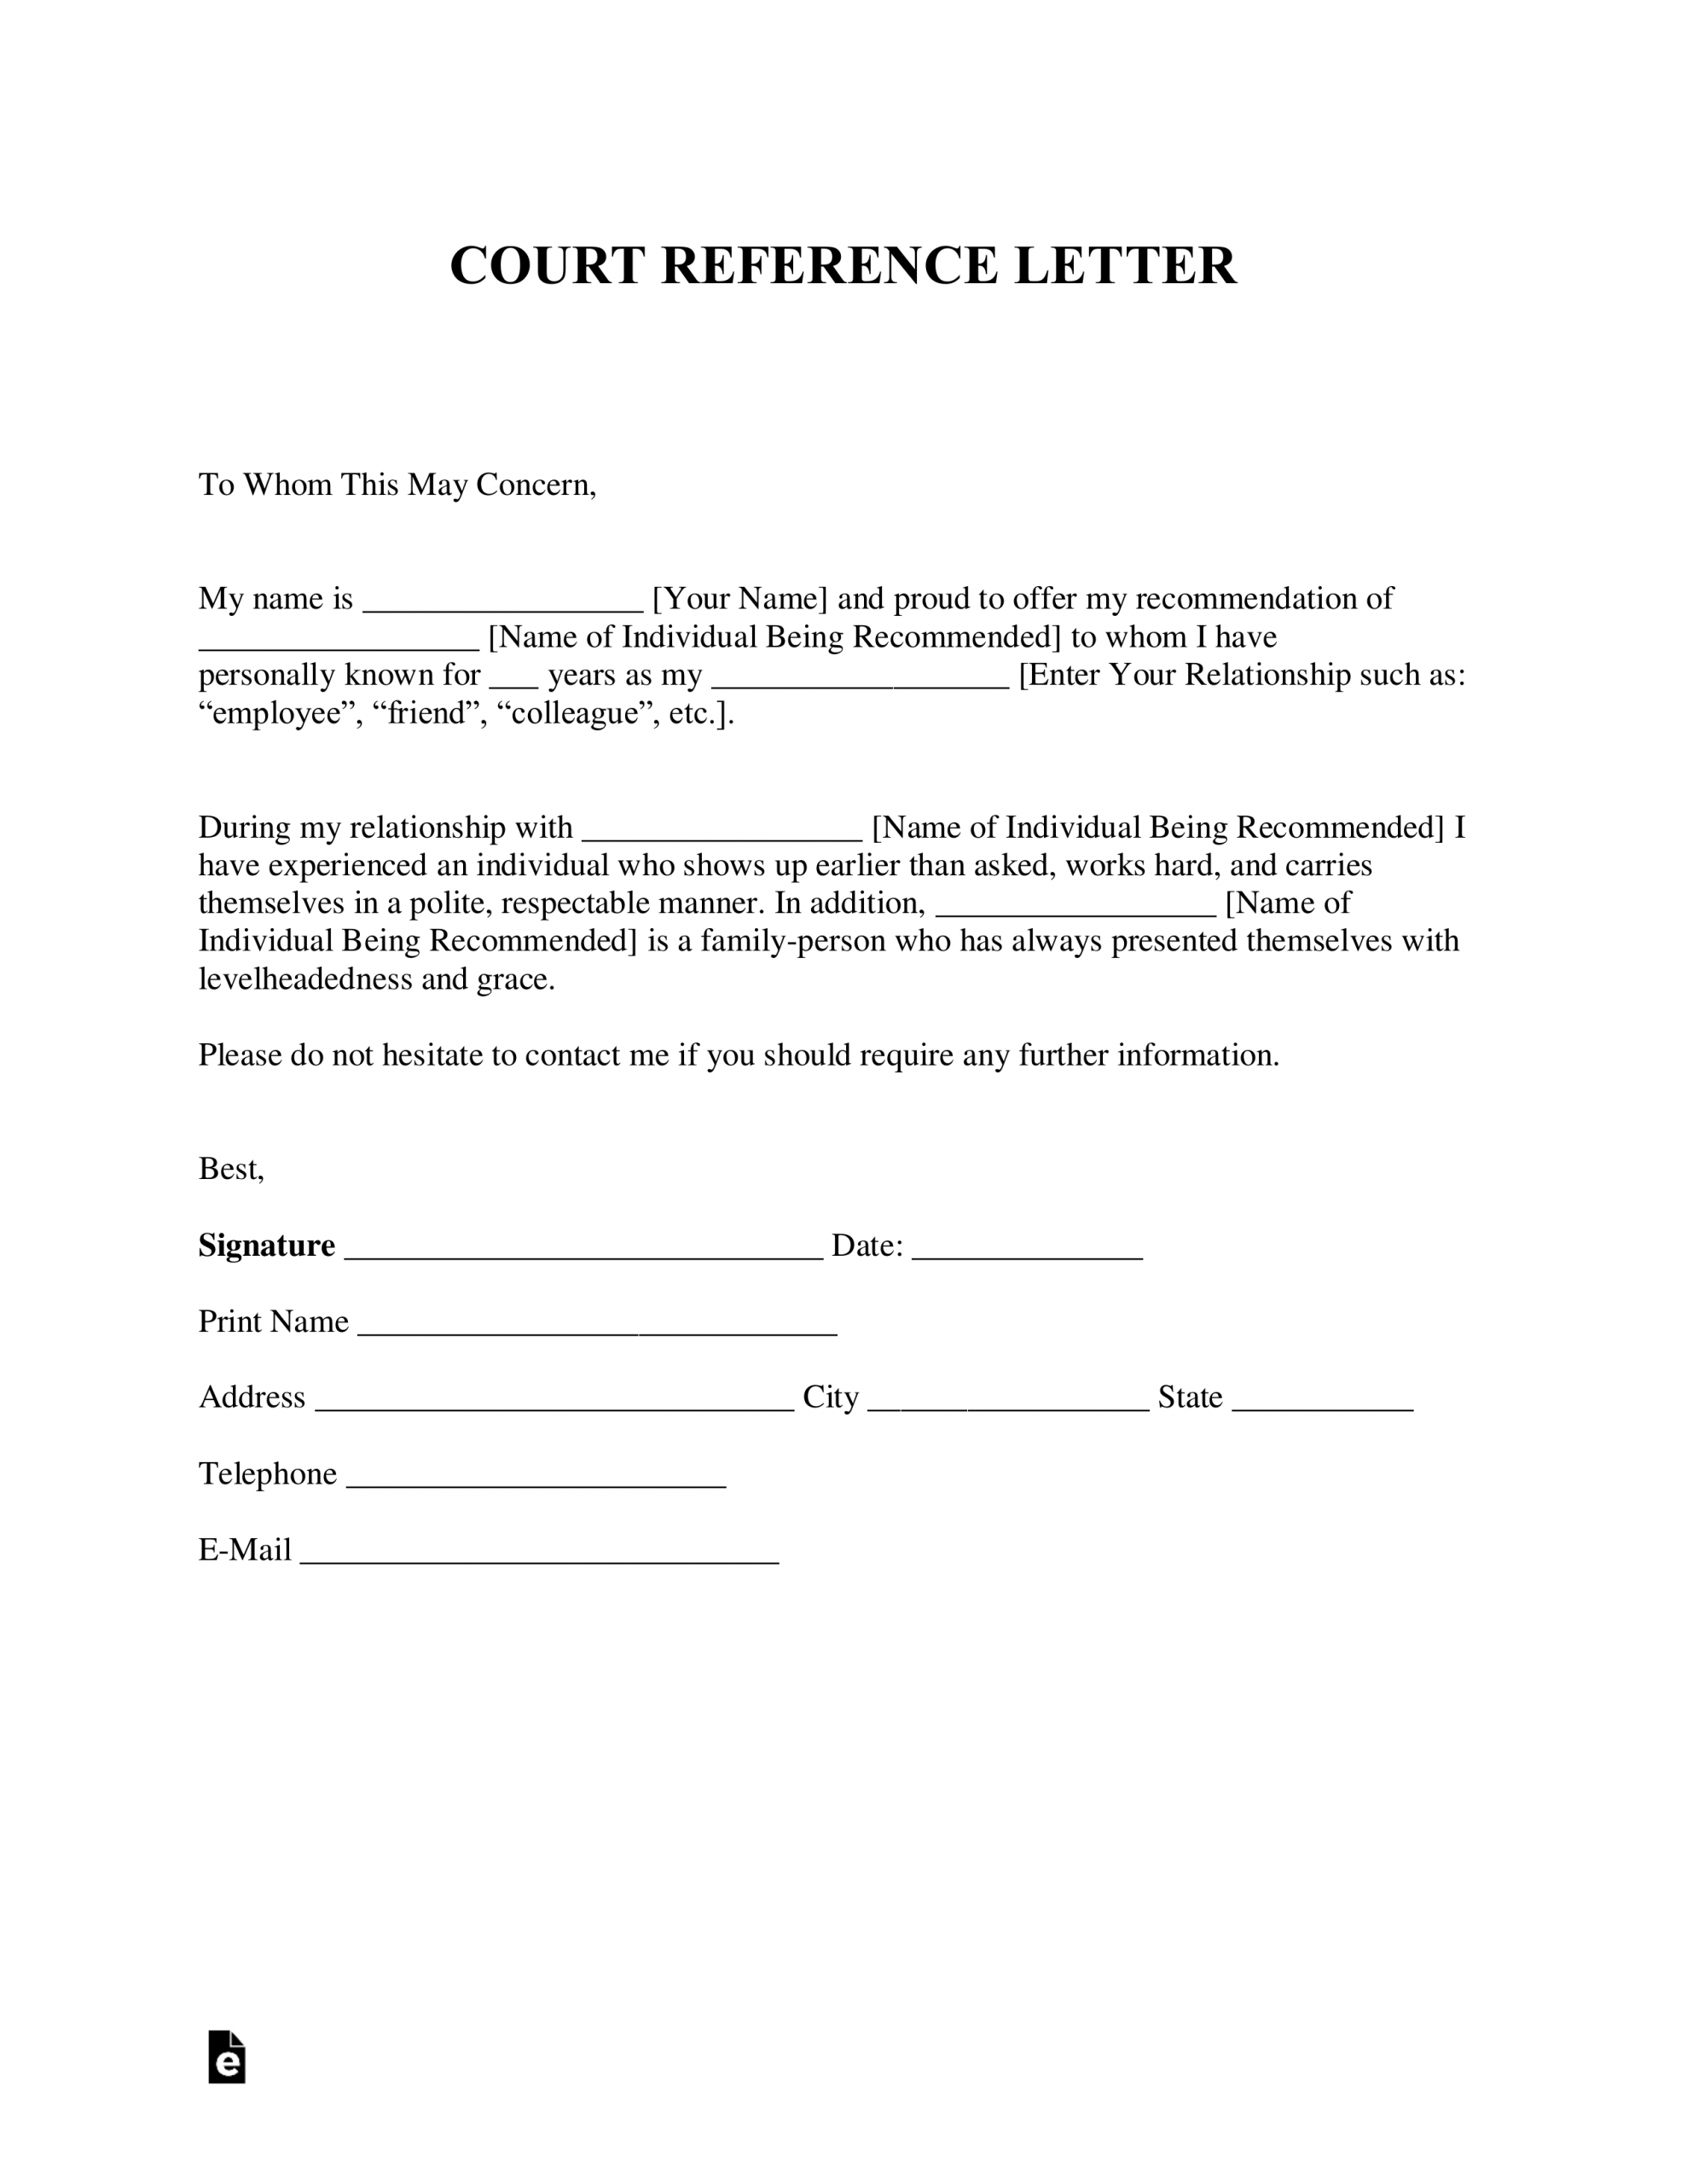 Free Character Reference Letter For Court Template within sizing 2550 X 3301